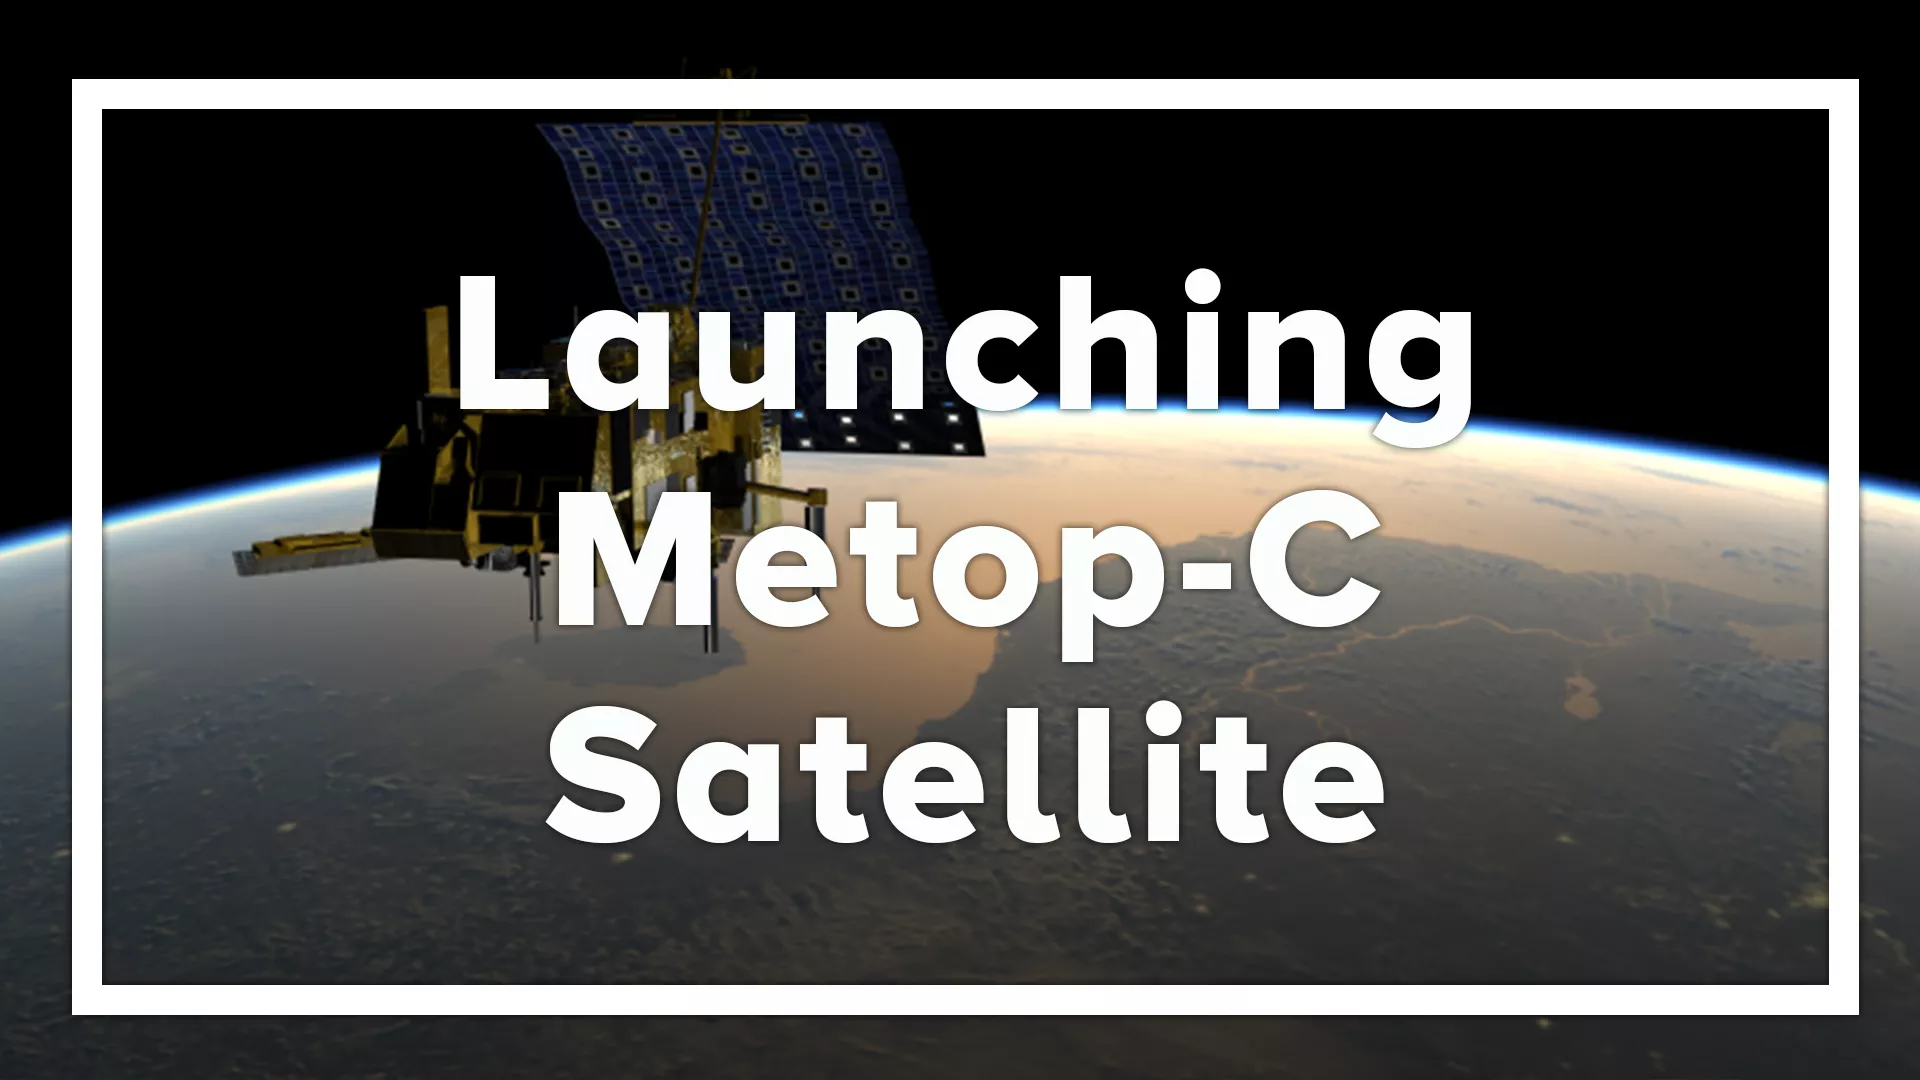 Image with text; launching metop-c satellite